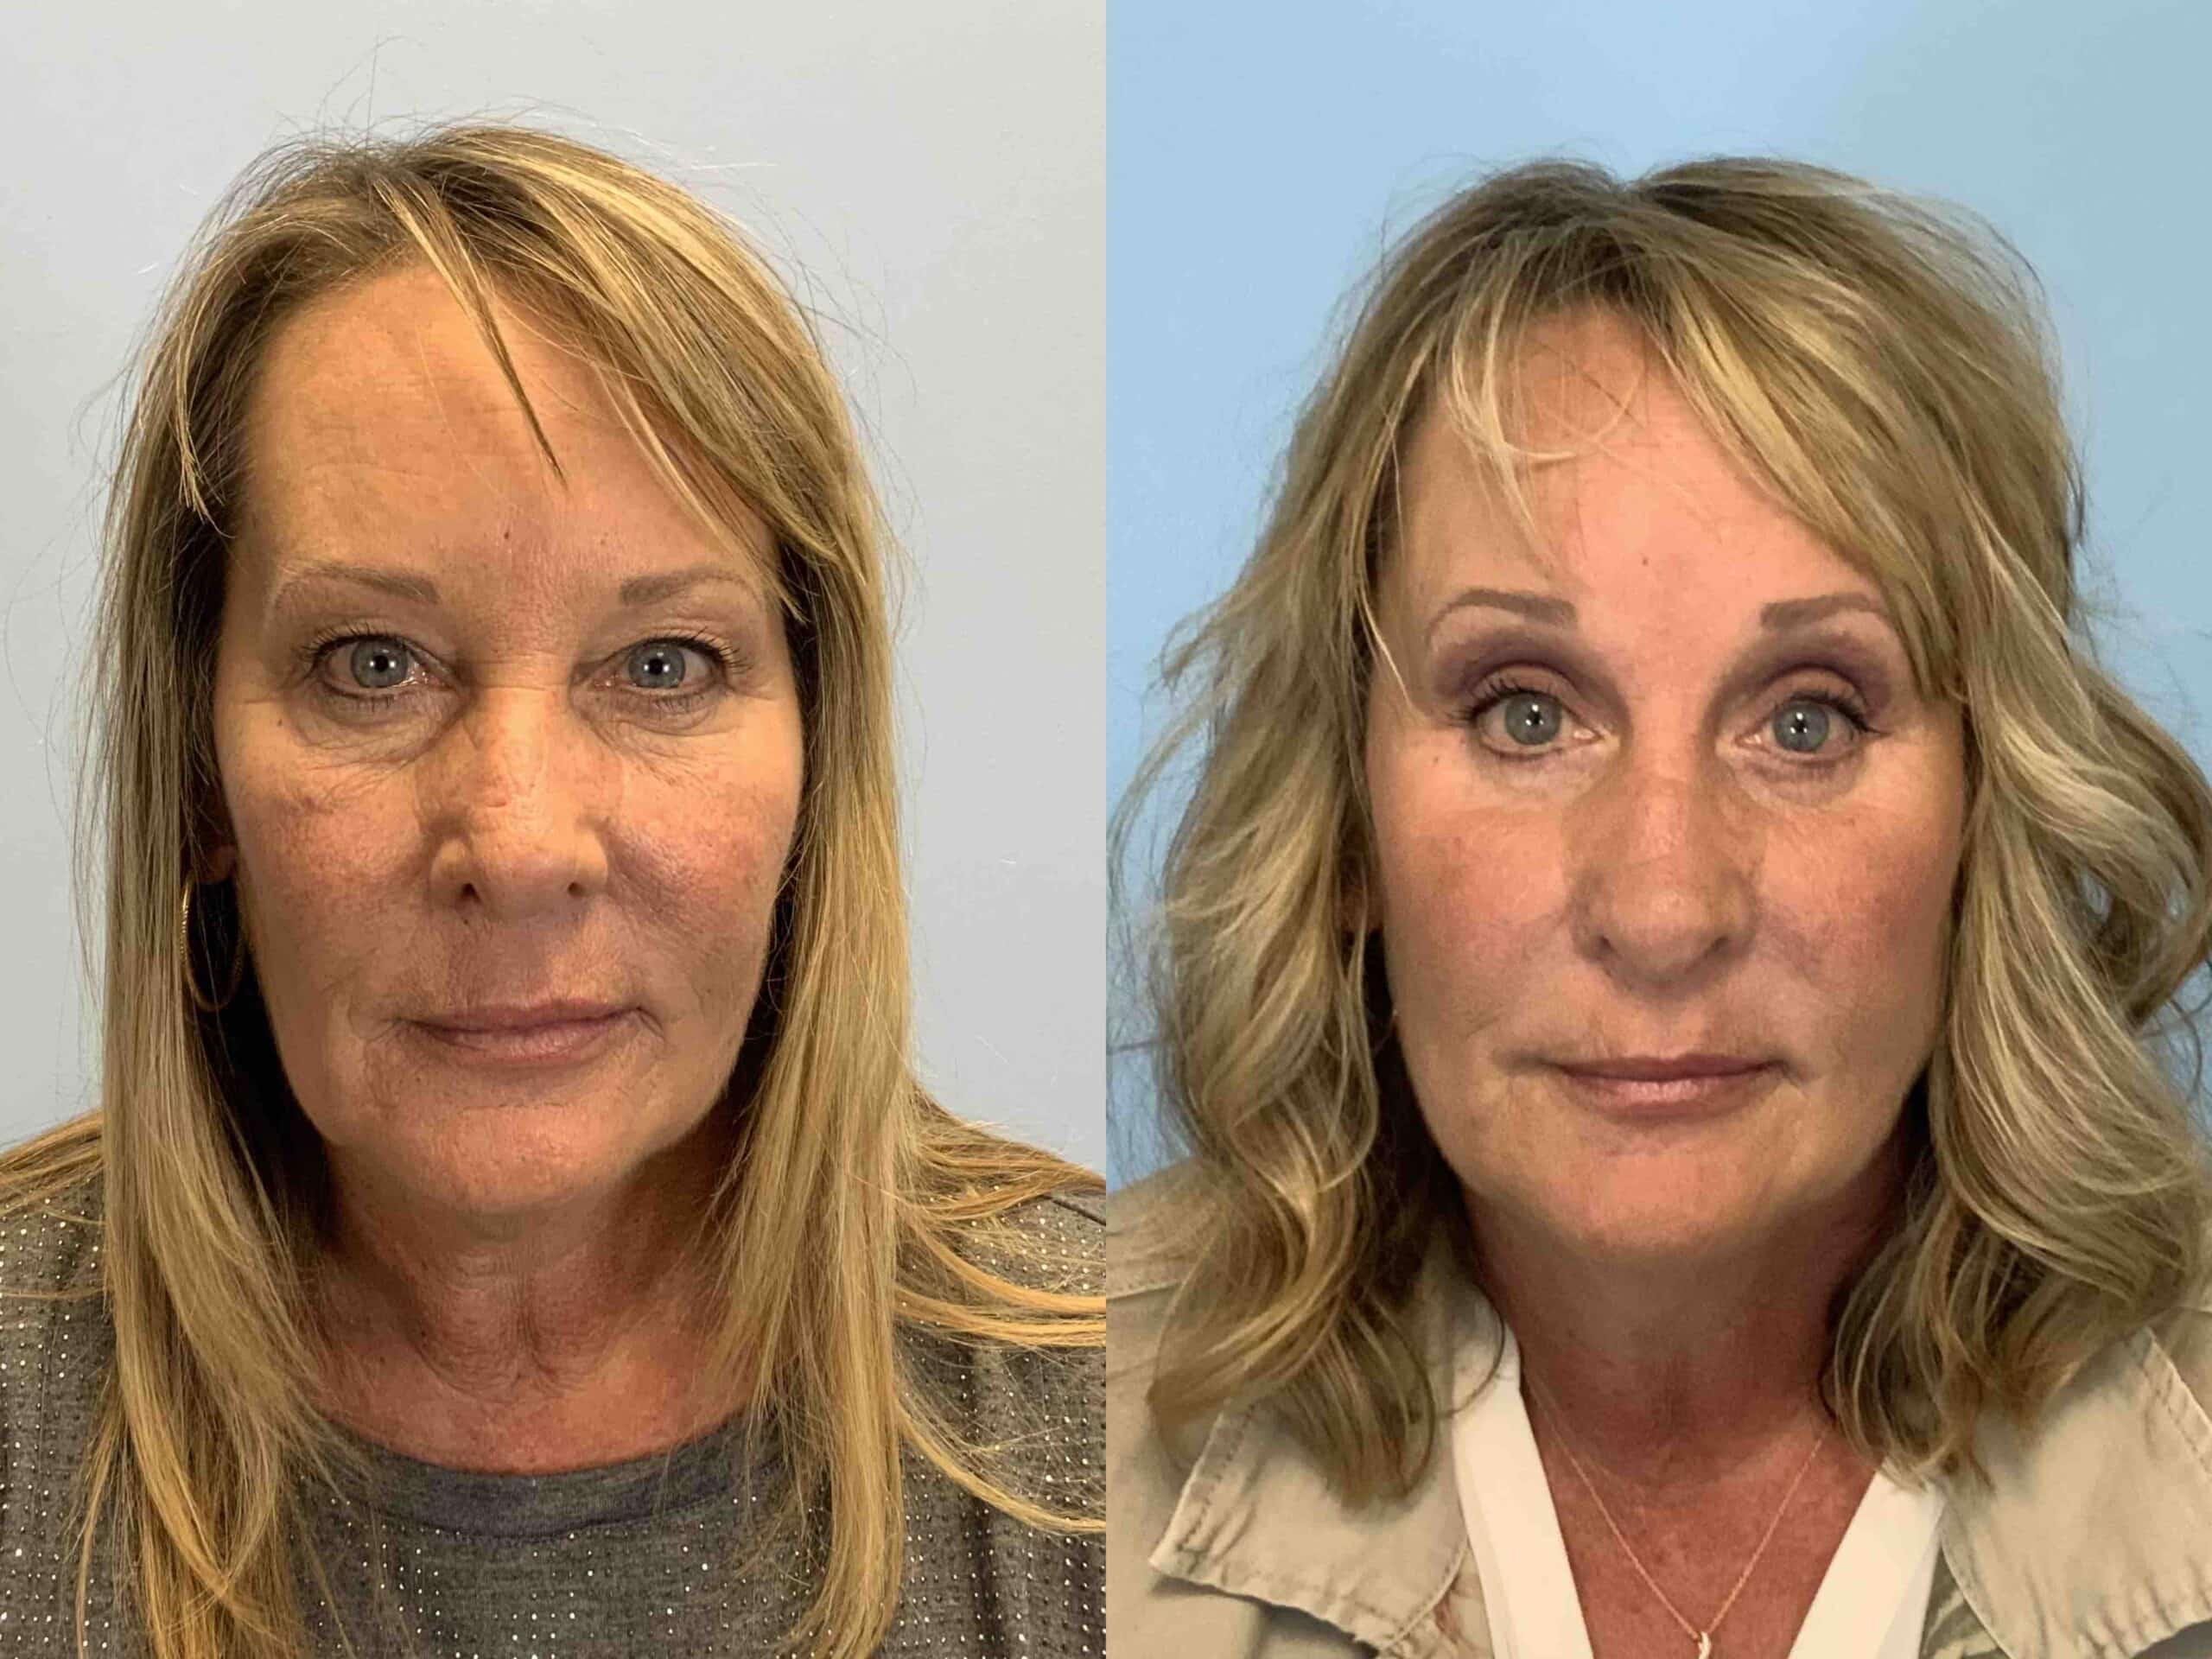 Before and after, 7 mo post op from Rhinoplasty, Septoplasty, Upper and Lower Blepharoplasty, Canthopexy, Endo Brow Lift performed by Dr. Paul Vanek